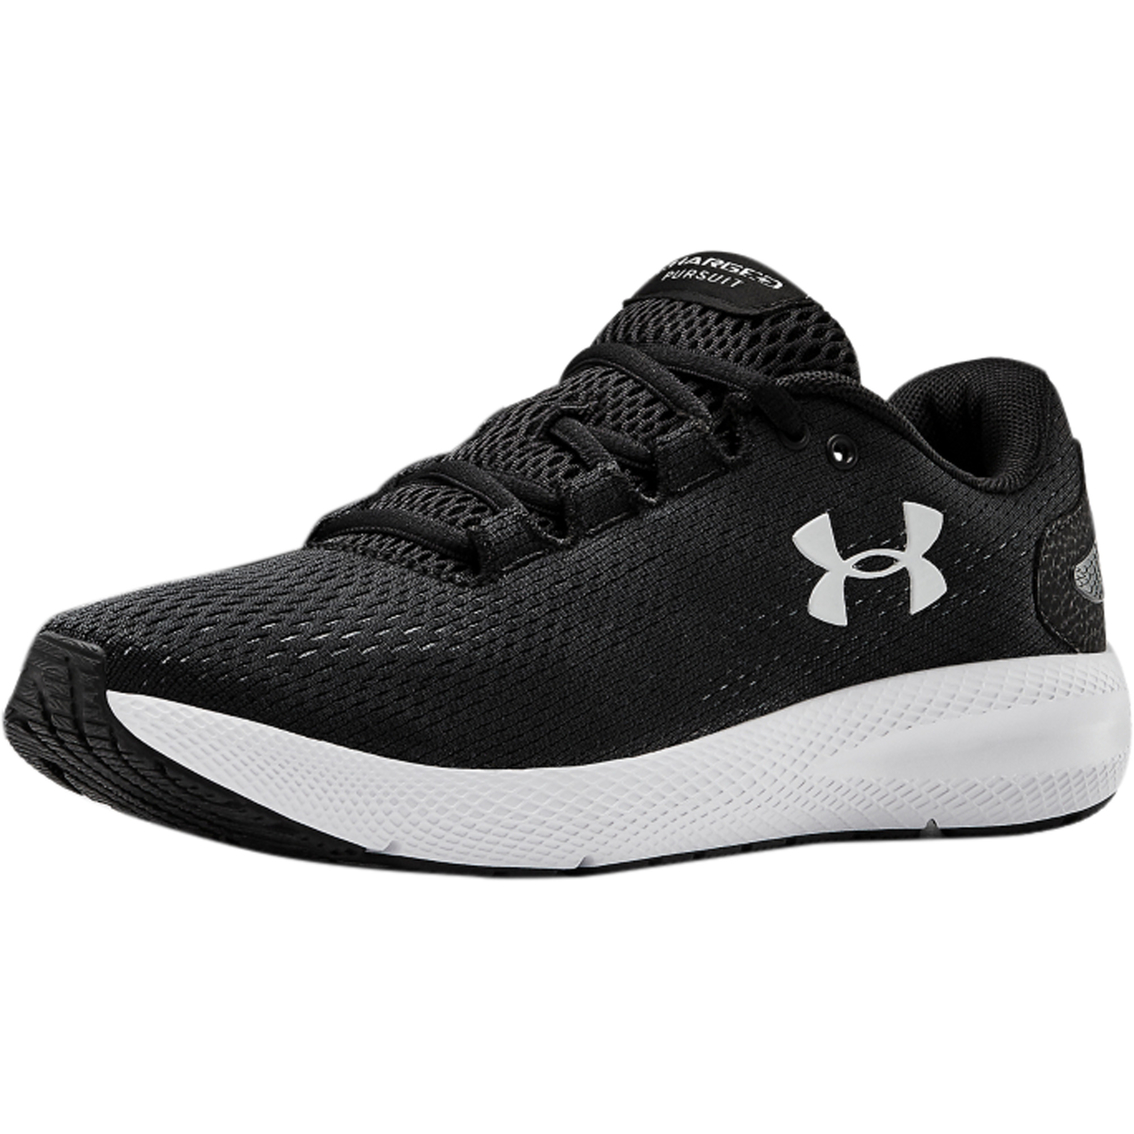 Under Armour Women's Charged Pursuit 2 Running Shoes | Women's Athletic ...